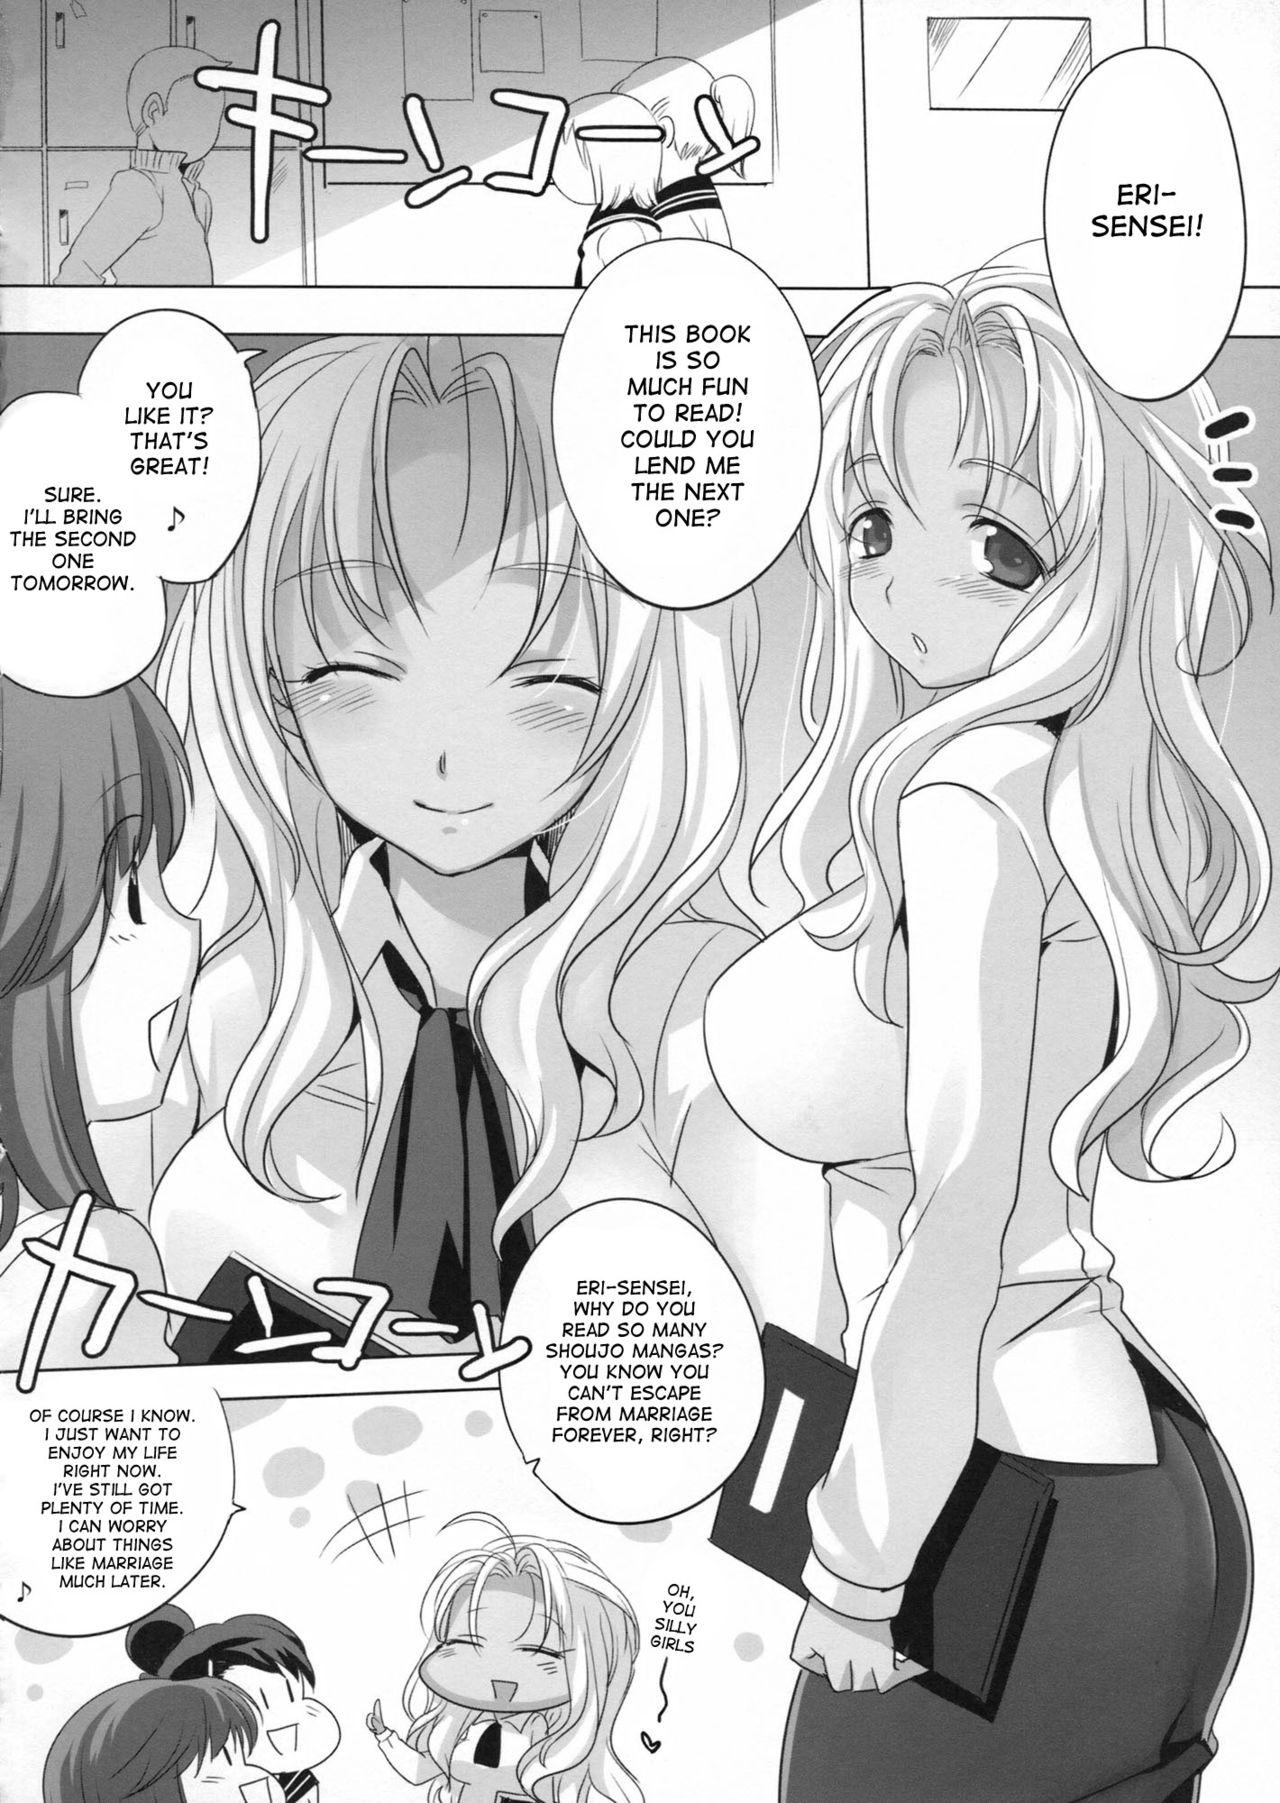 Roleplay (C82) [Maxzheart (Fight Fight Chiharu)] Akogare no Seidorei | The Teacher (Sex Slave) Whom I Admire [English] {doujin-moe.us} - Original Action - Page 3